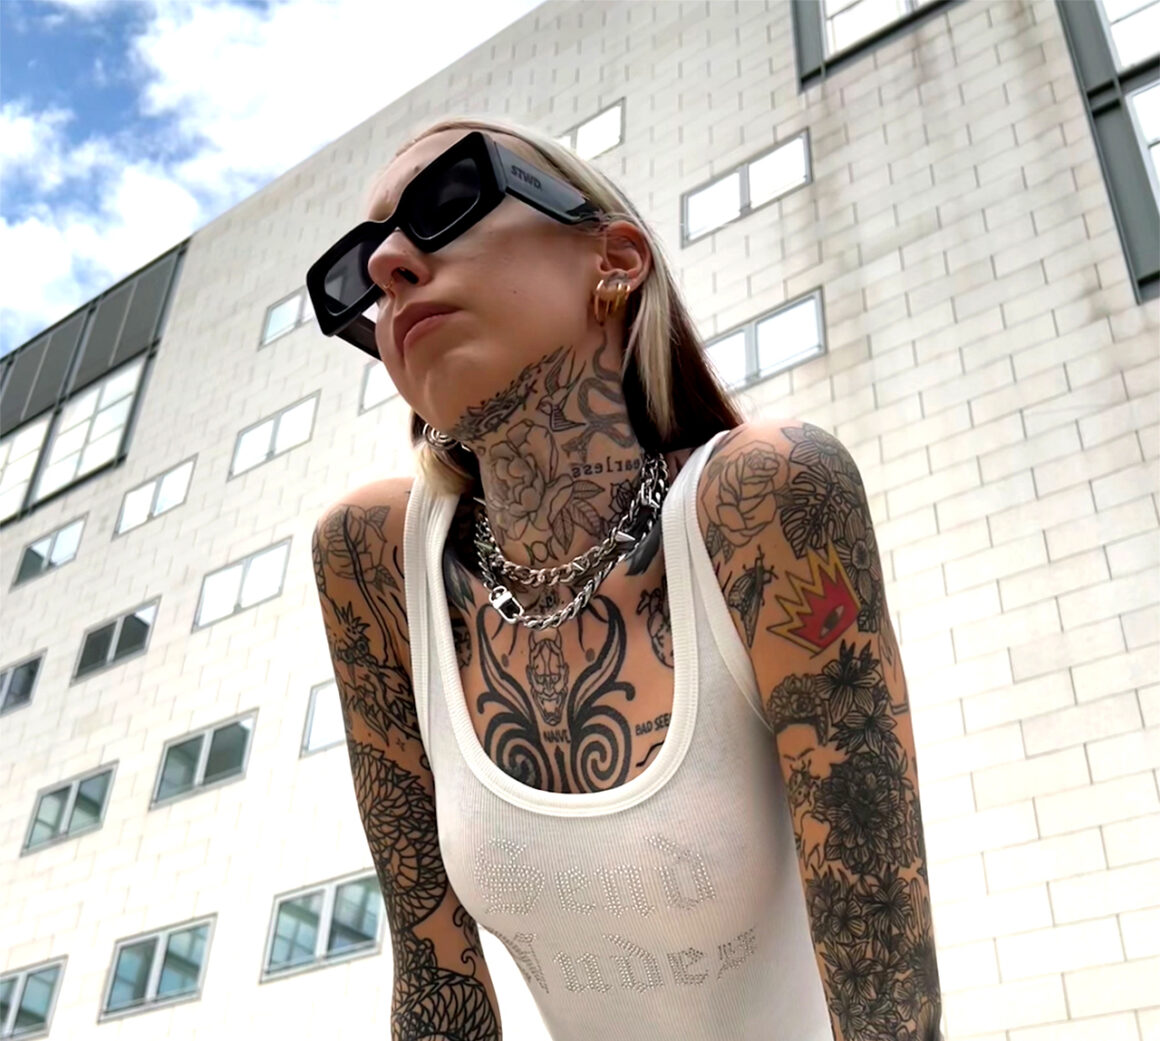 Confident bearded male with tattoo in sunglasses wearing stylish outfit  looking away while standing on street with modern buildings in city   hipster unshaven  Stock Photo  528089142